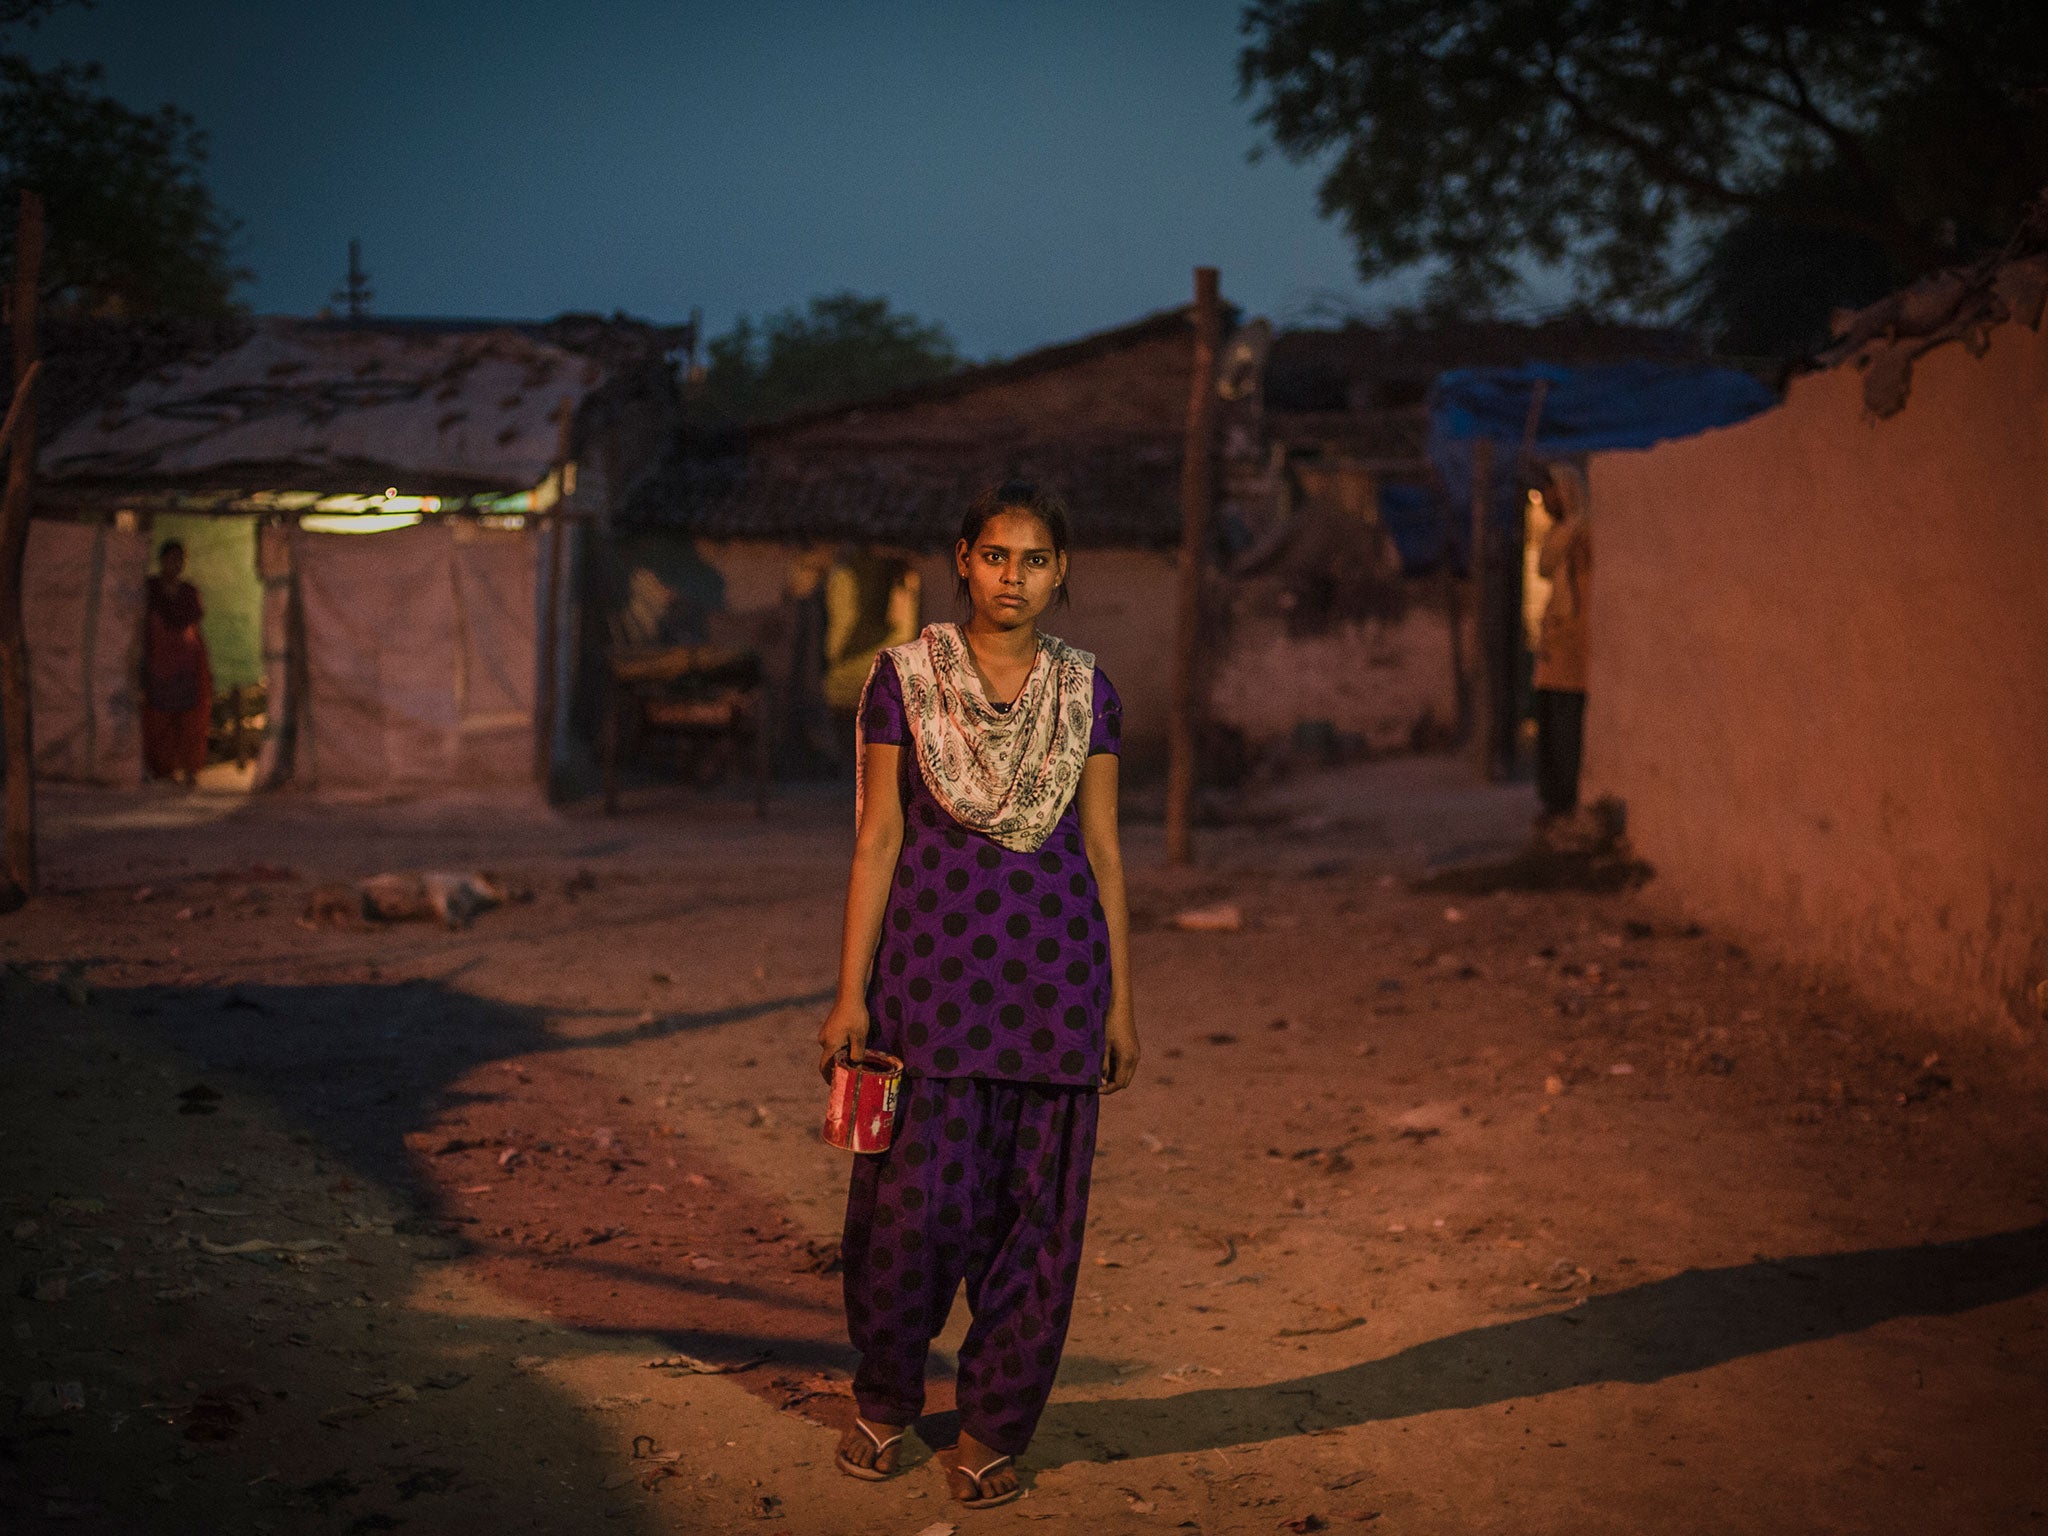 Some 300 girls and women in India still practise open defecation. Over half the country’s population, 800 million people, do not have access to a toilet that meets basic standards